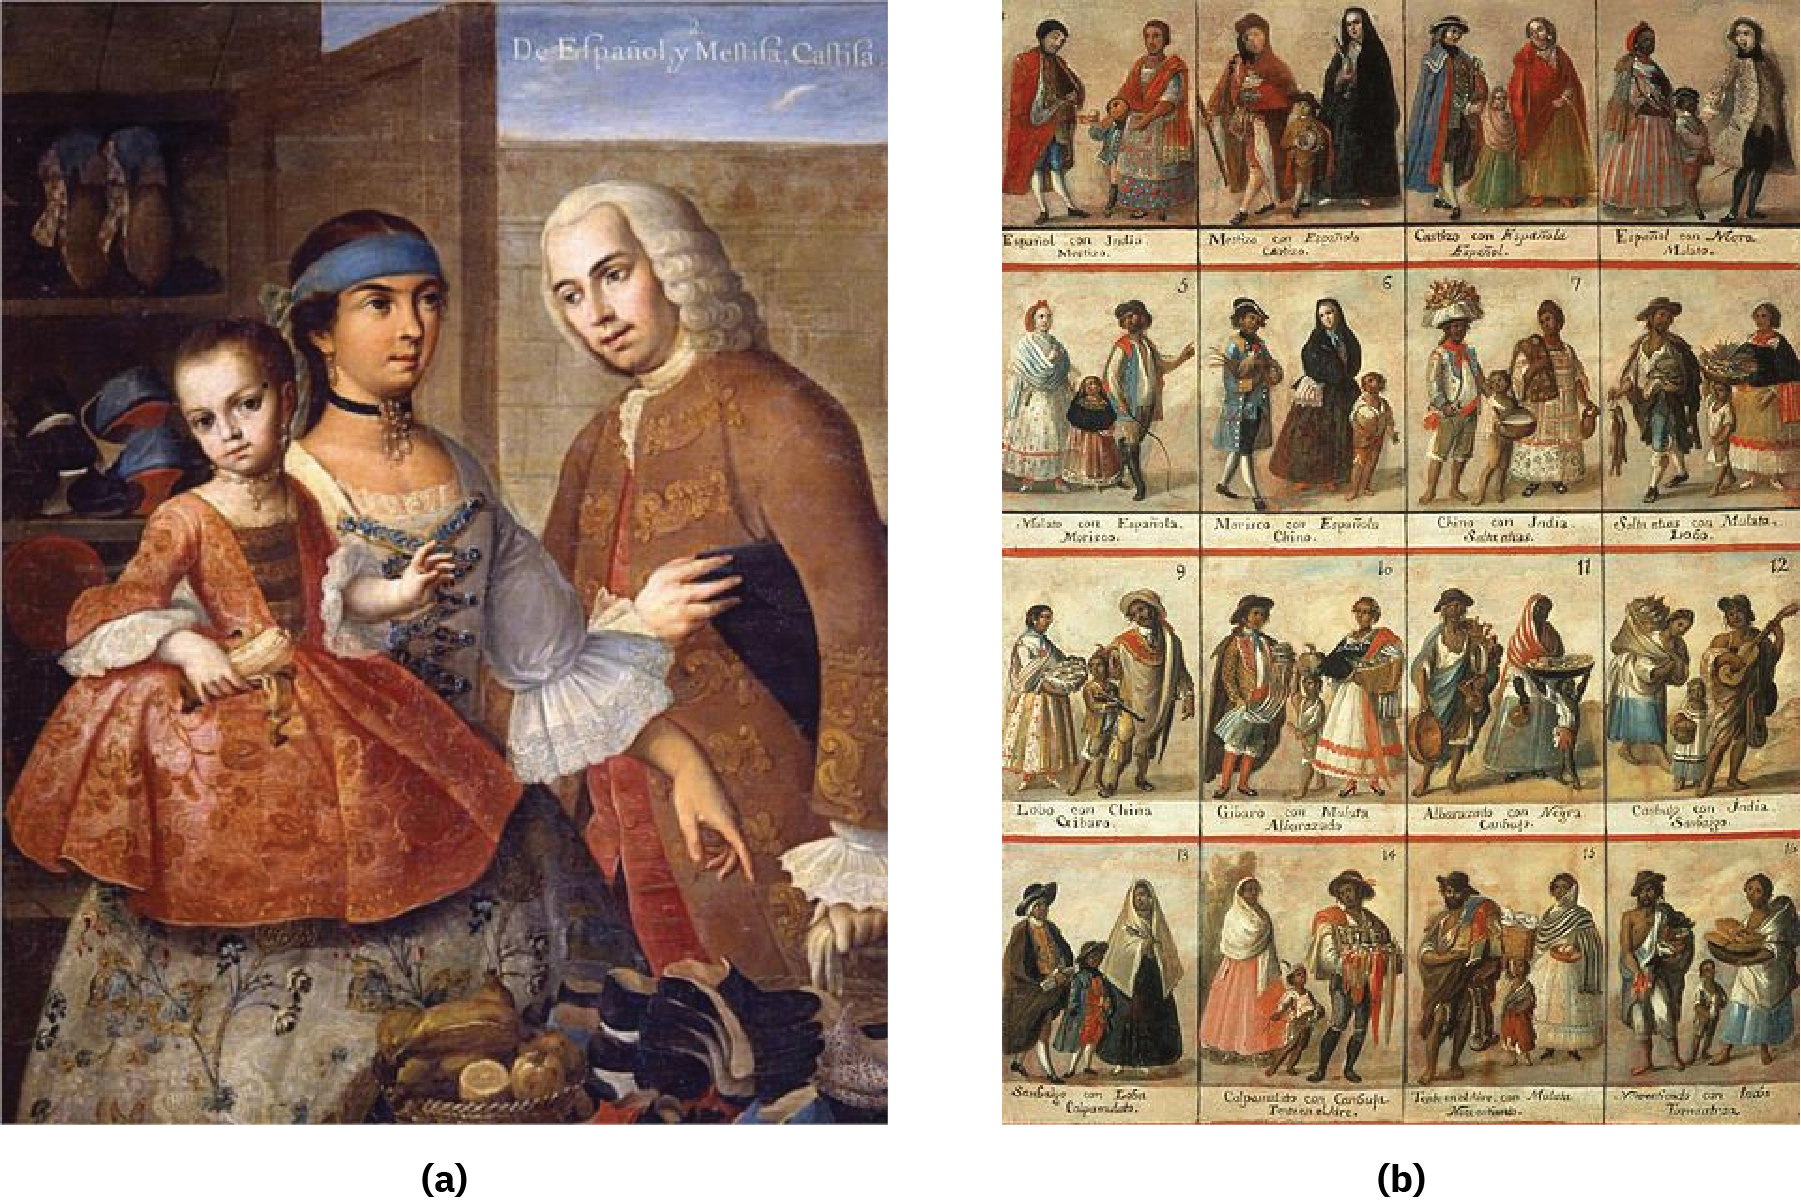 Image (a) shows a white father with his Spanish Indian wife and their mixed-race daughter. The man wears shirt, vest, and a long coat, decorated with embroidery, and oversized lace cuffs. The mother and child both wear jewelry and dresses decorated with floral embroidery. Image (b) consists of sixteen small paintings. Each painting shows a different racial combination of a man, woman, and child.